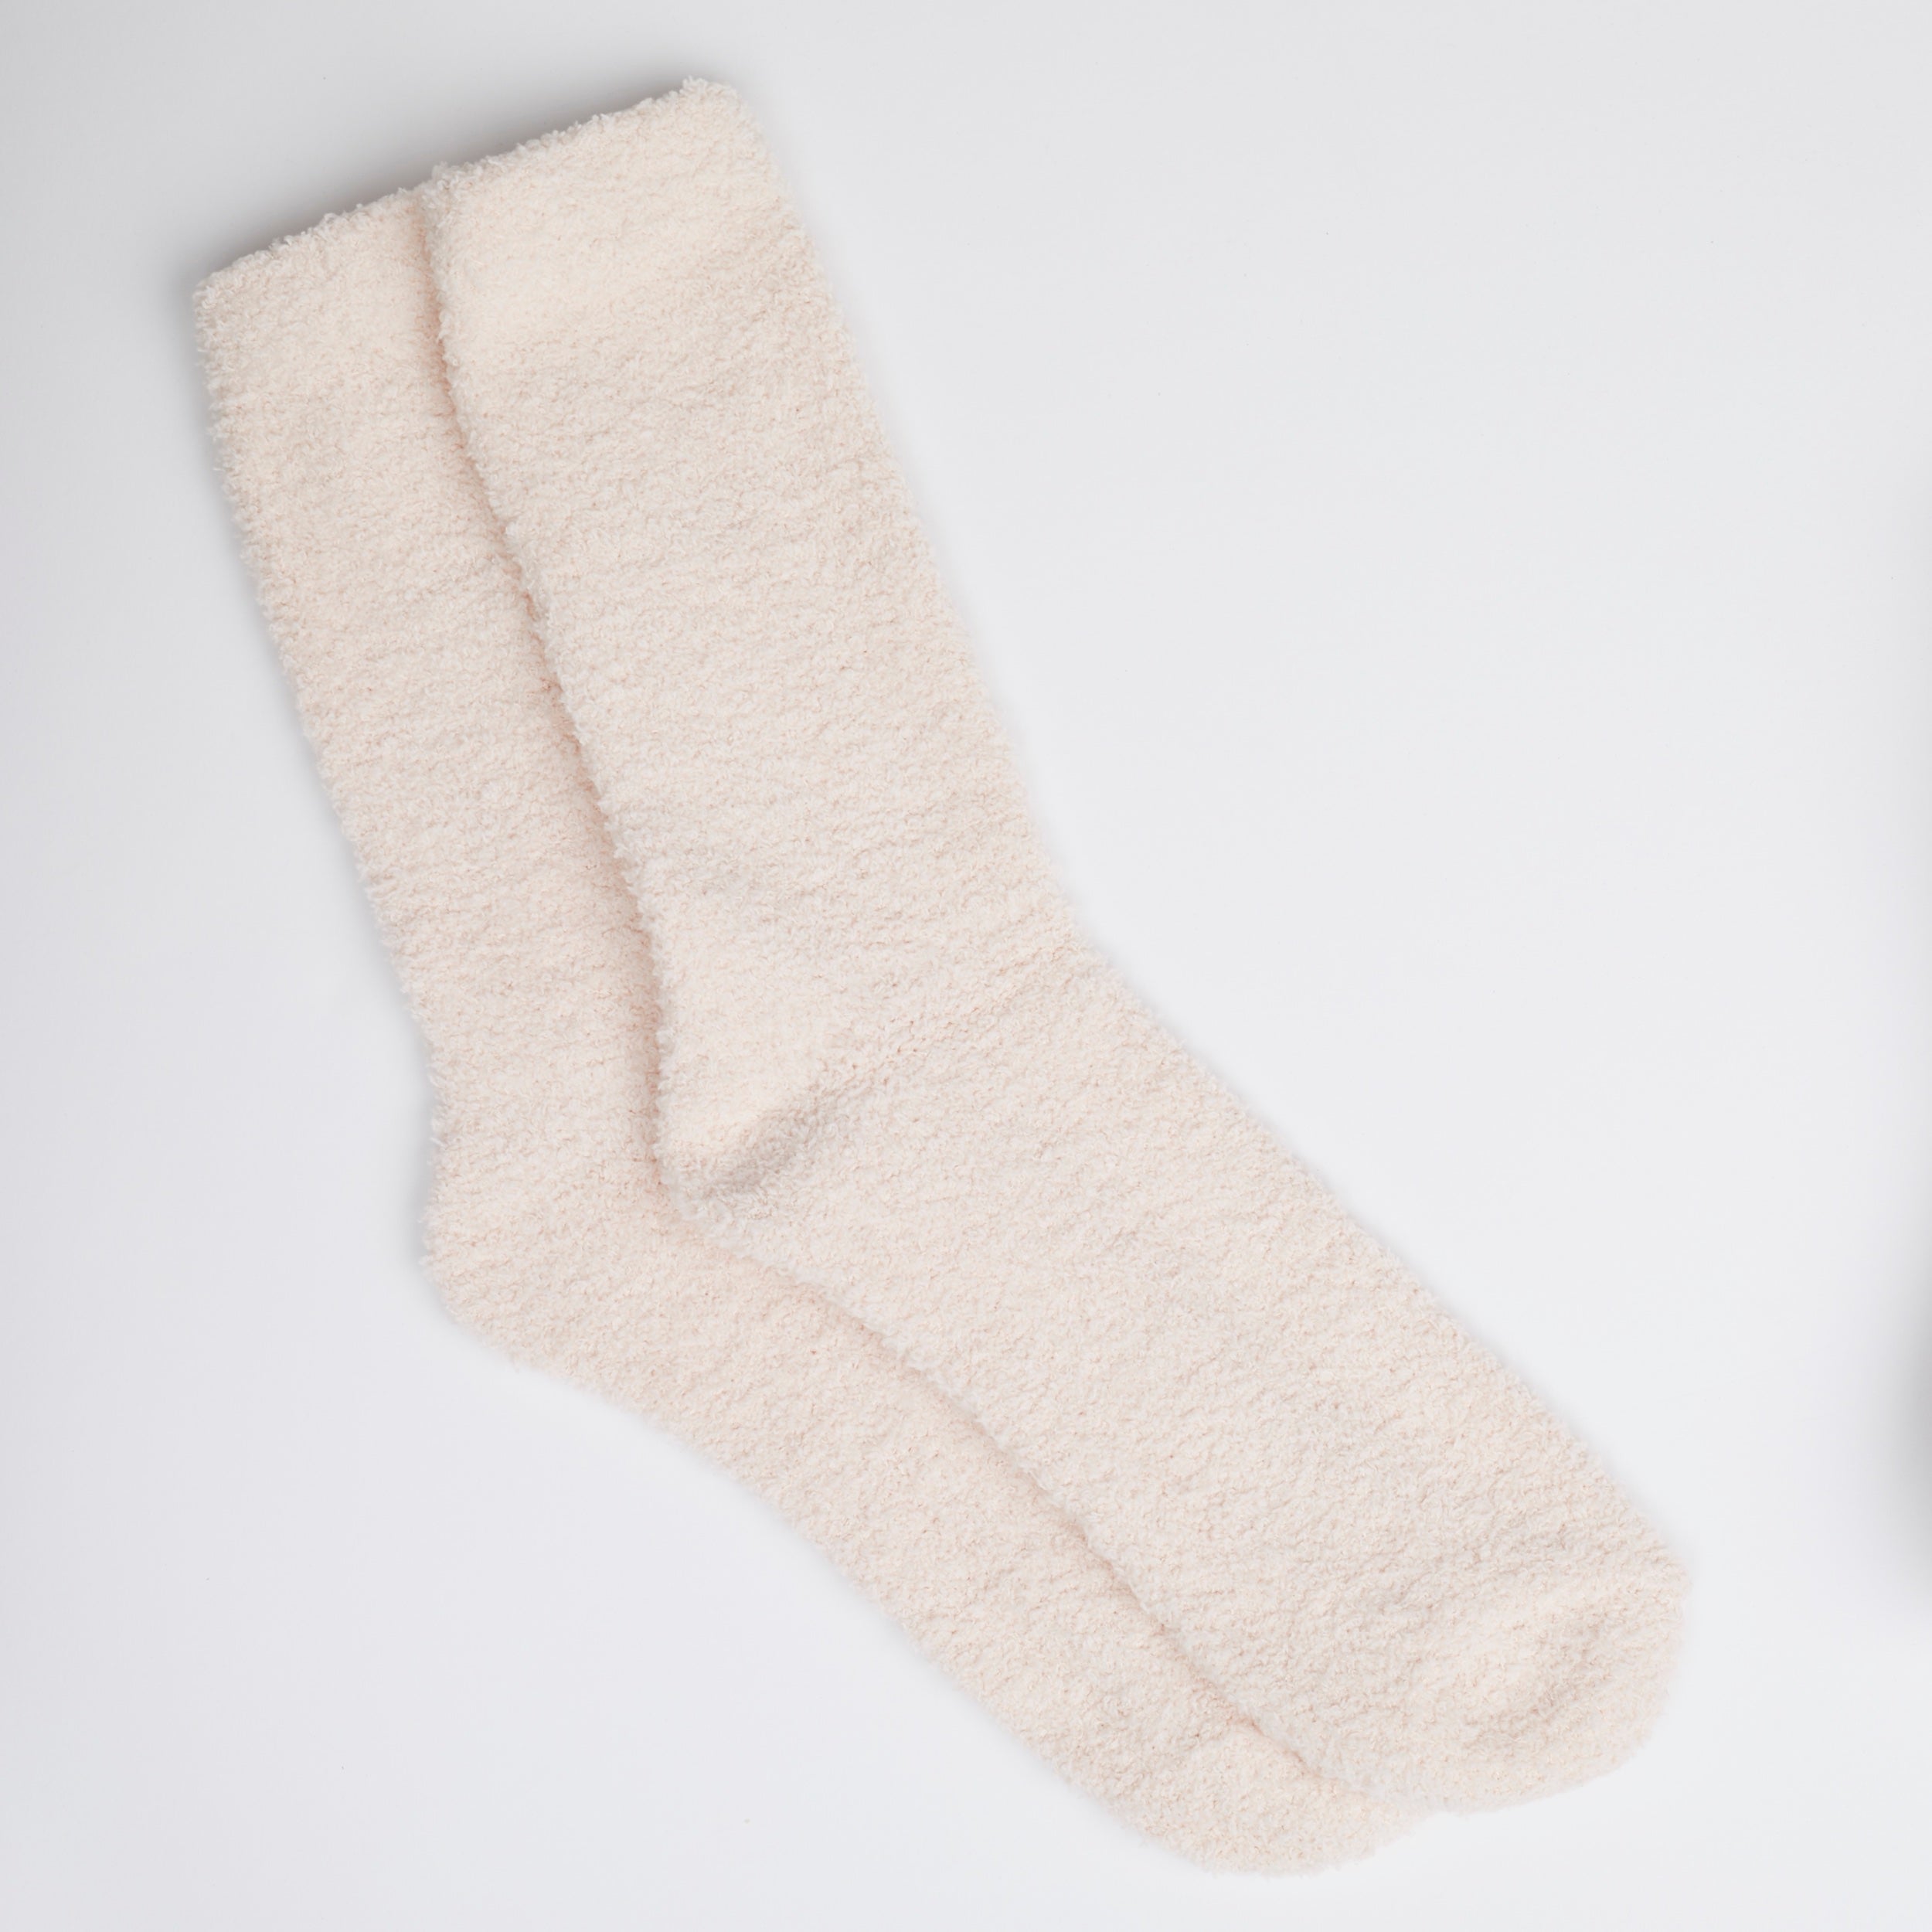 Two pink fuzzy socks on white background.